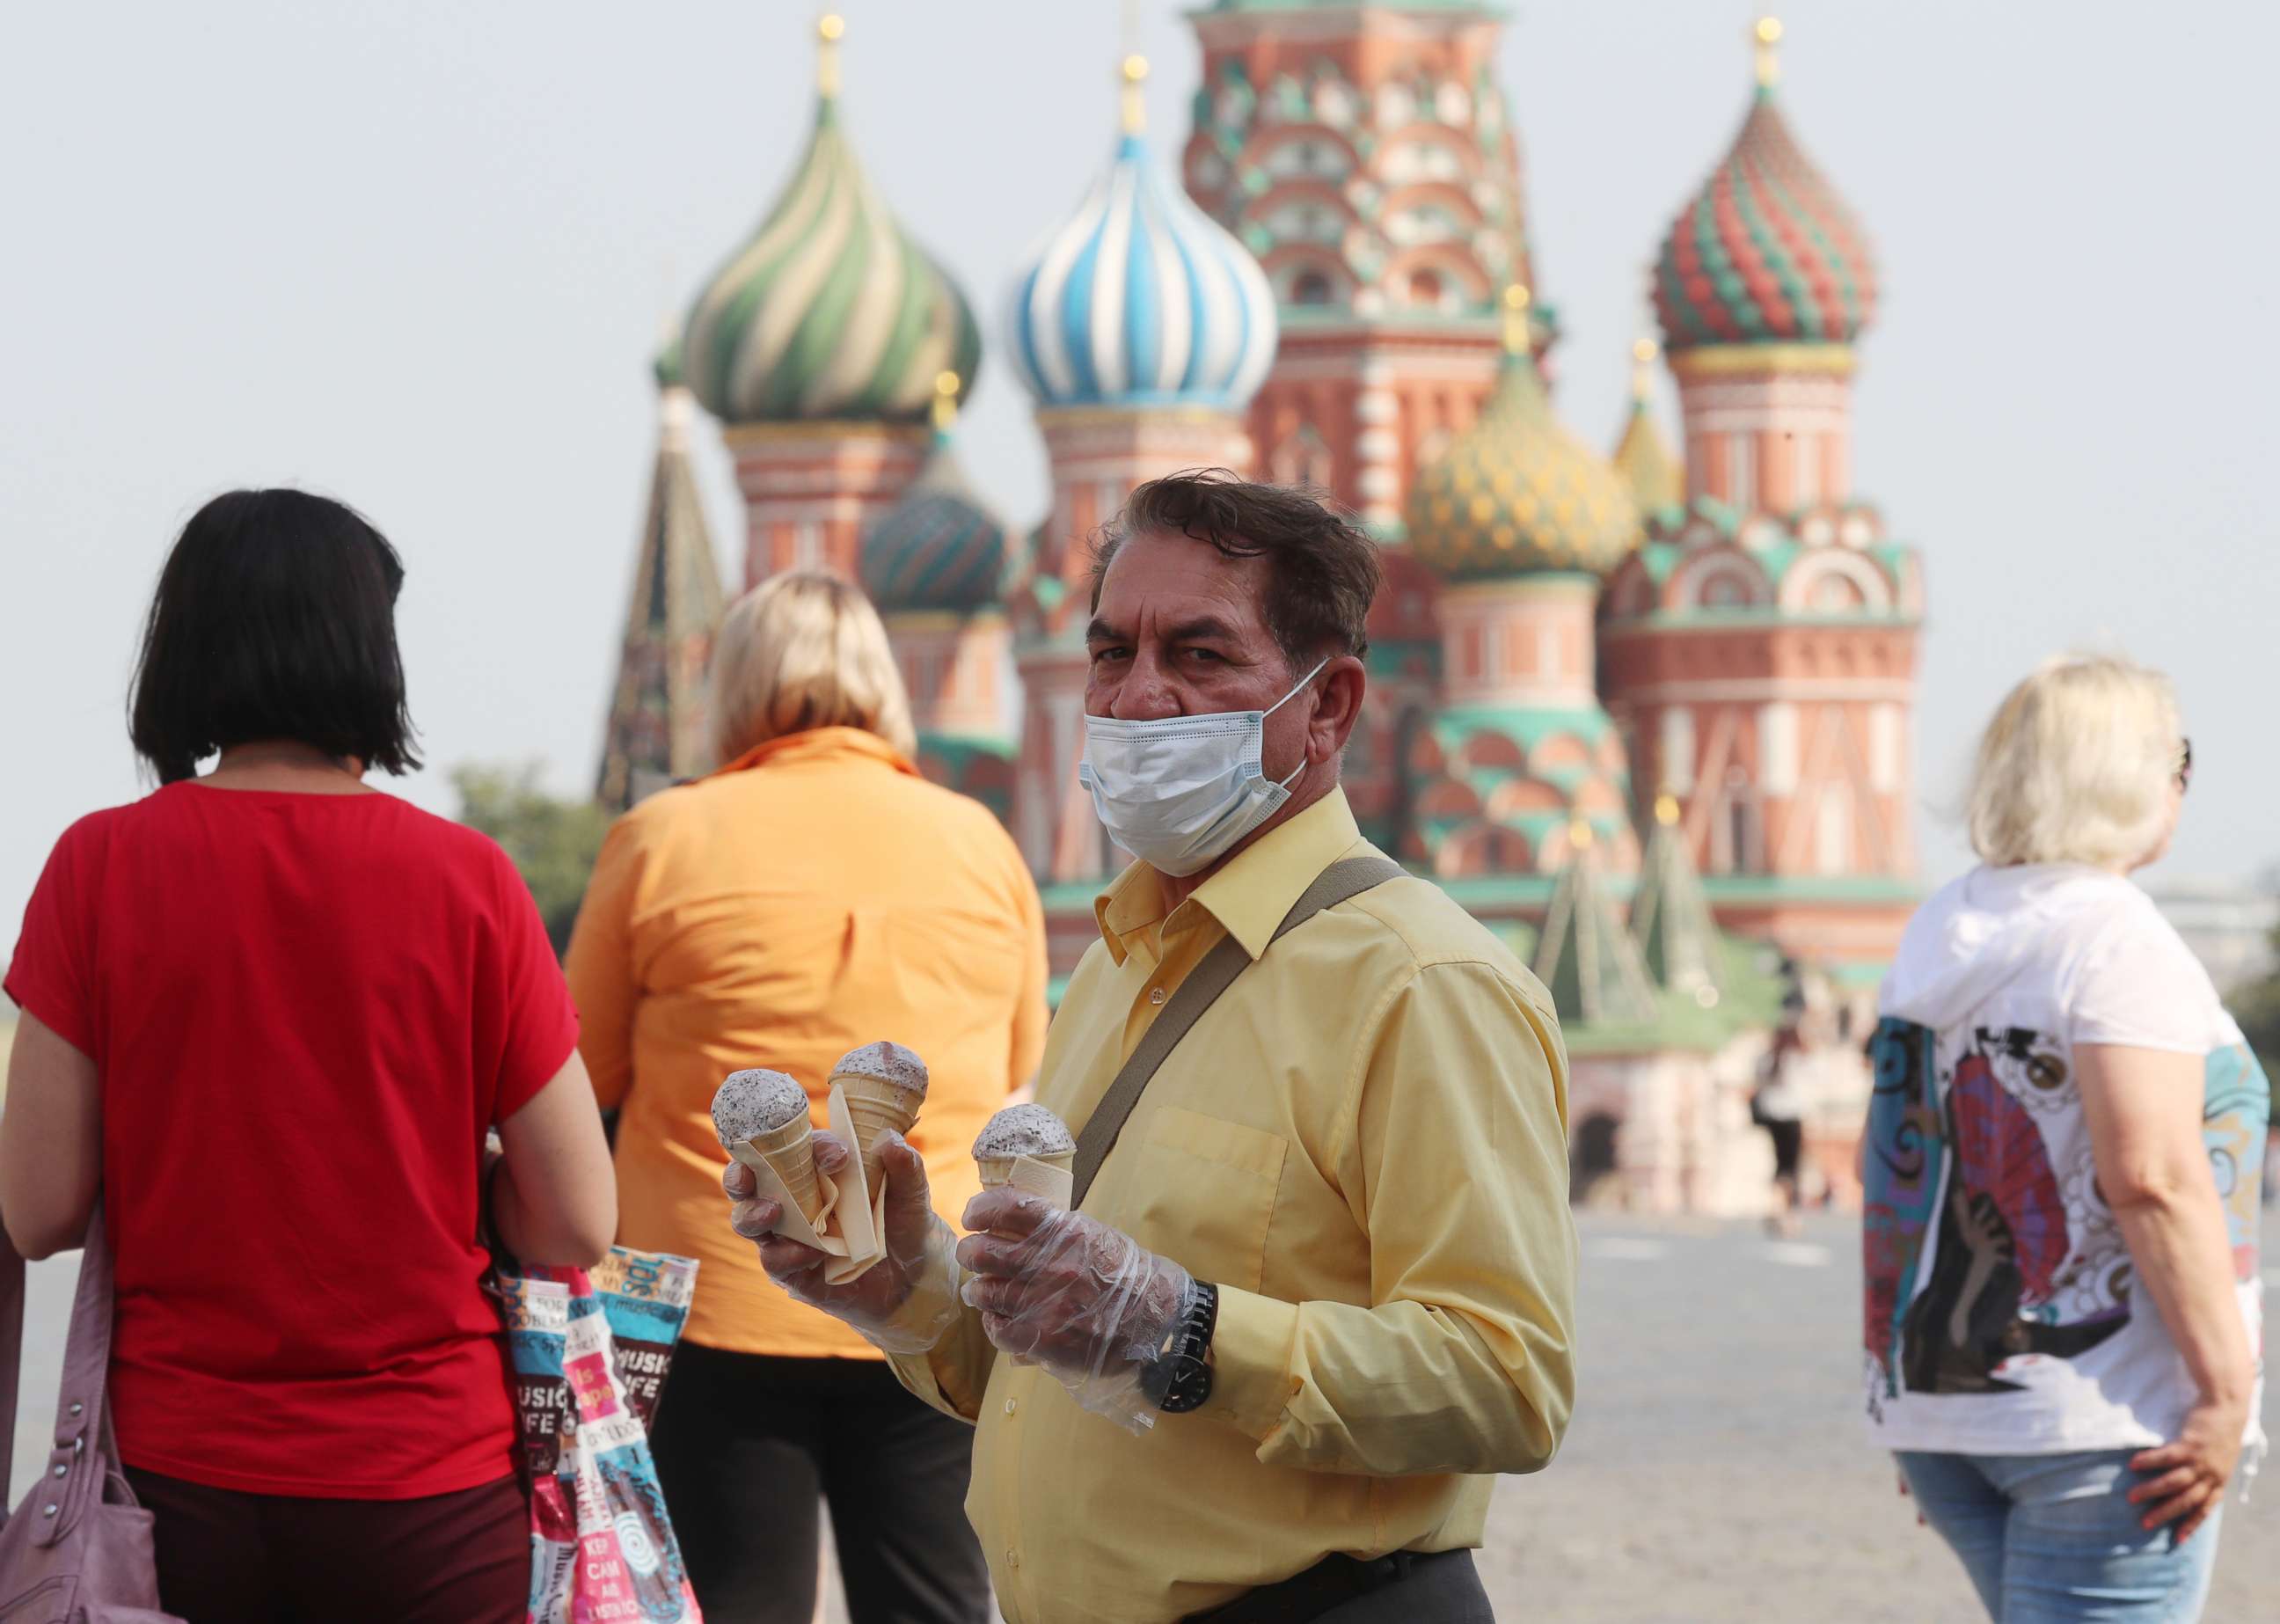 PHOTO: A man eats ice cream in Red Square with St. Basil's Cathedral in the background, in Moscow, June 23, 2021, in a photo released by Russian government owned media.